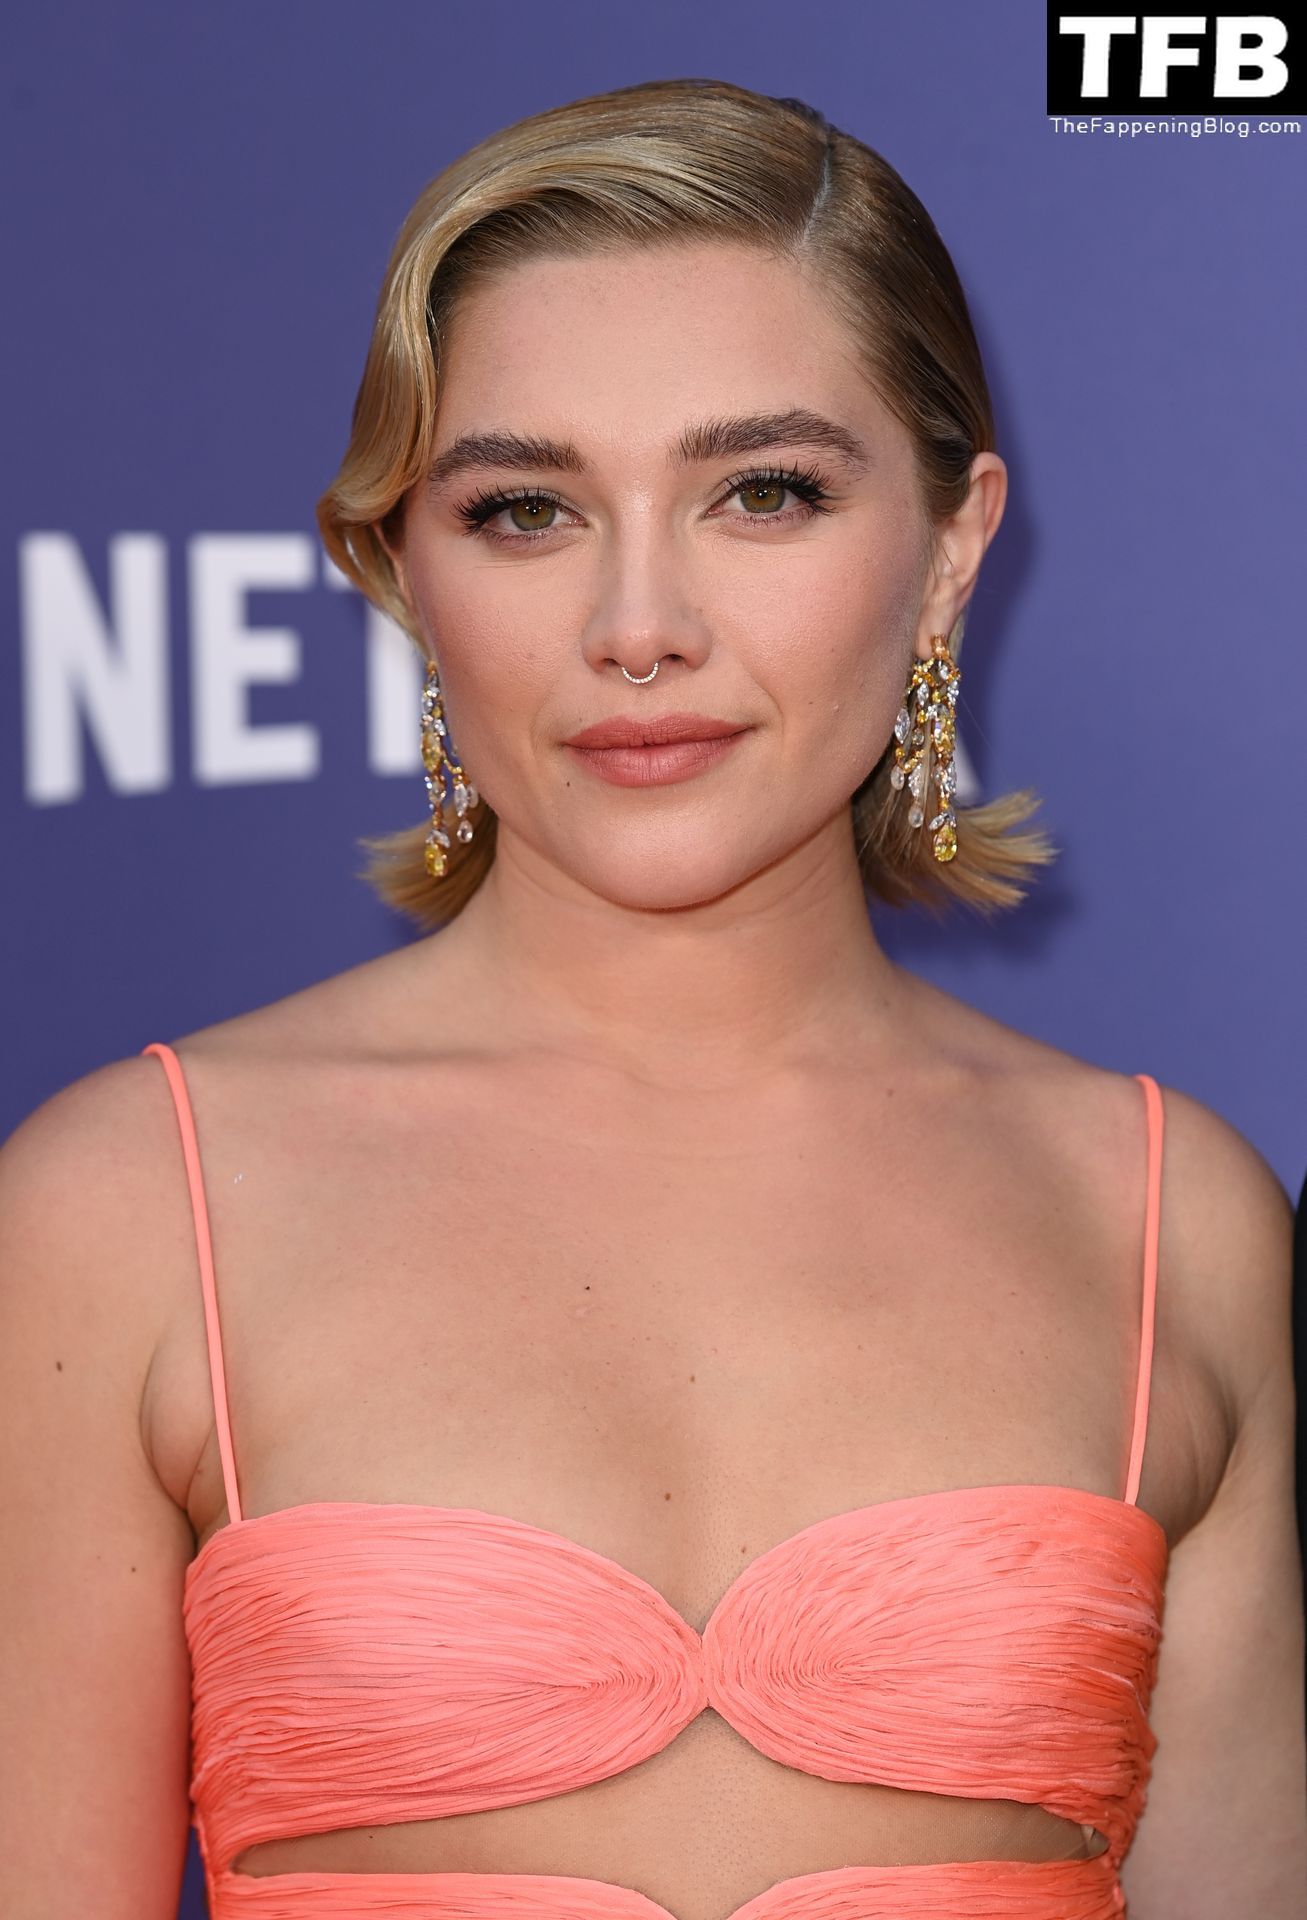 Florence-Pugh-Sexy-The-Fappening-Blog-51-1.jpg